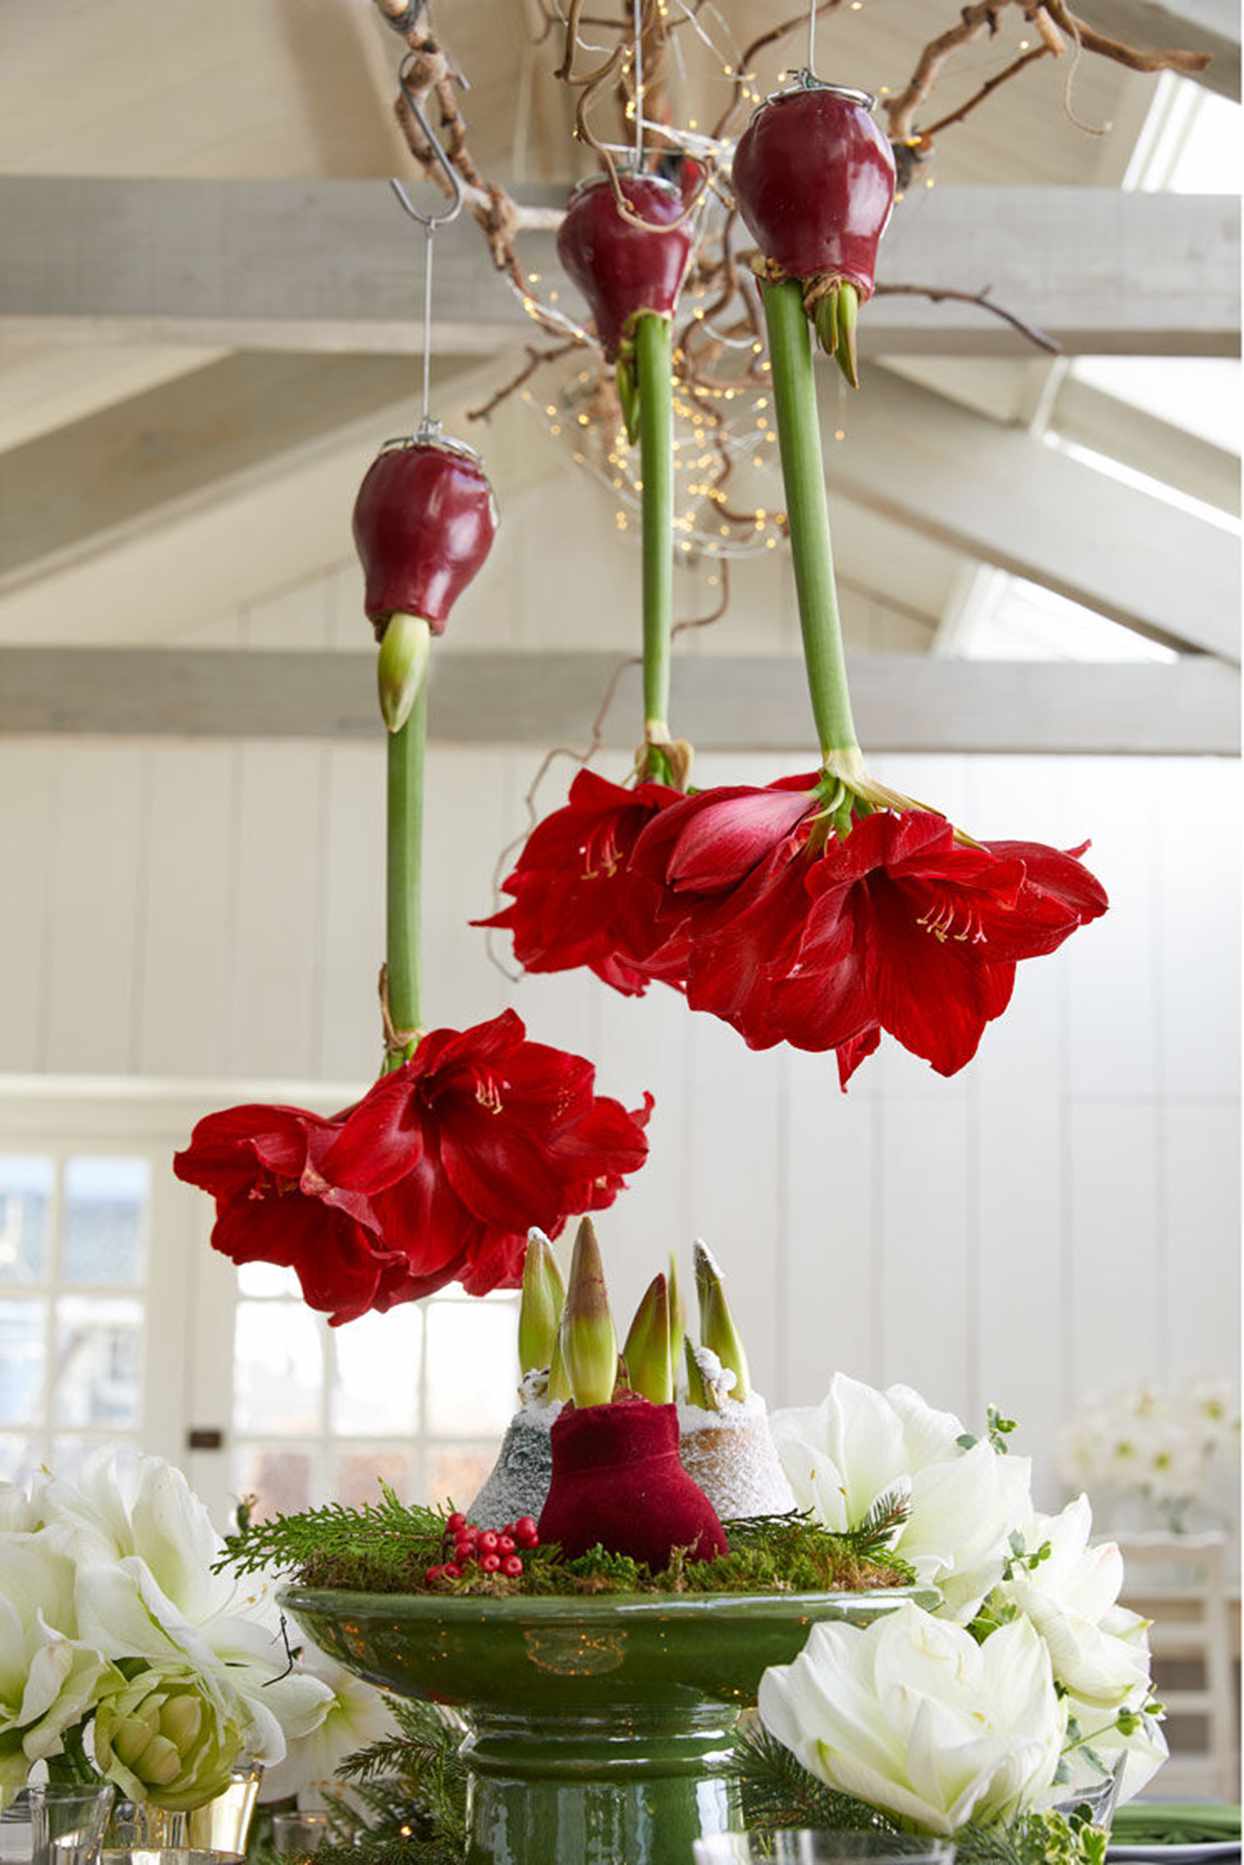 waxed amaryllis bulbs with red flowers hanging over table